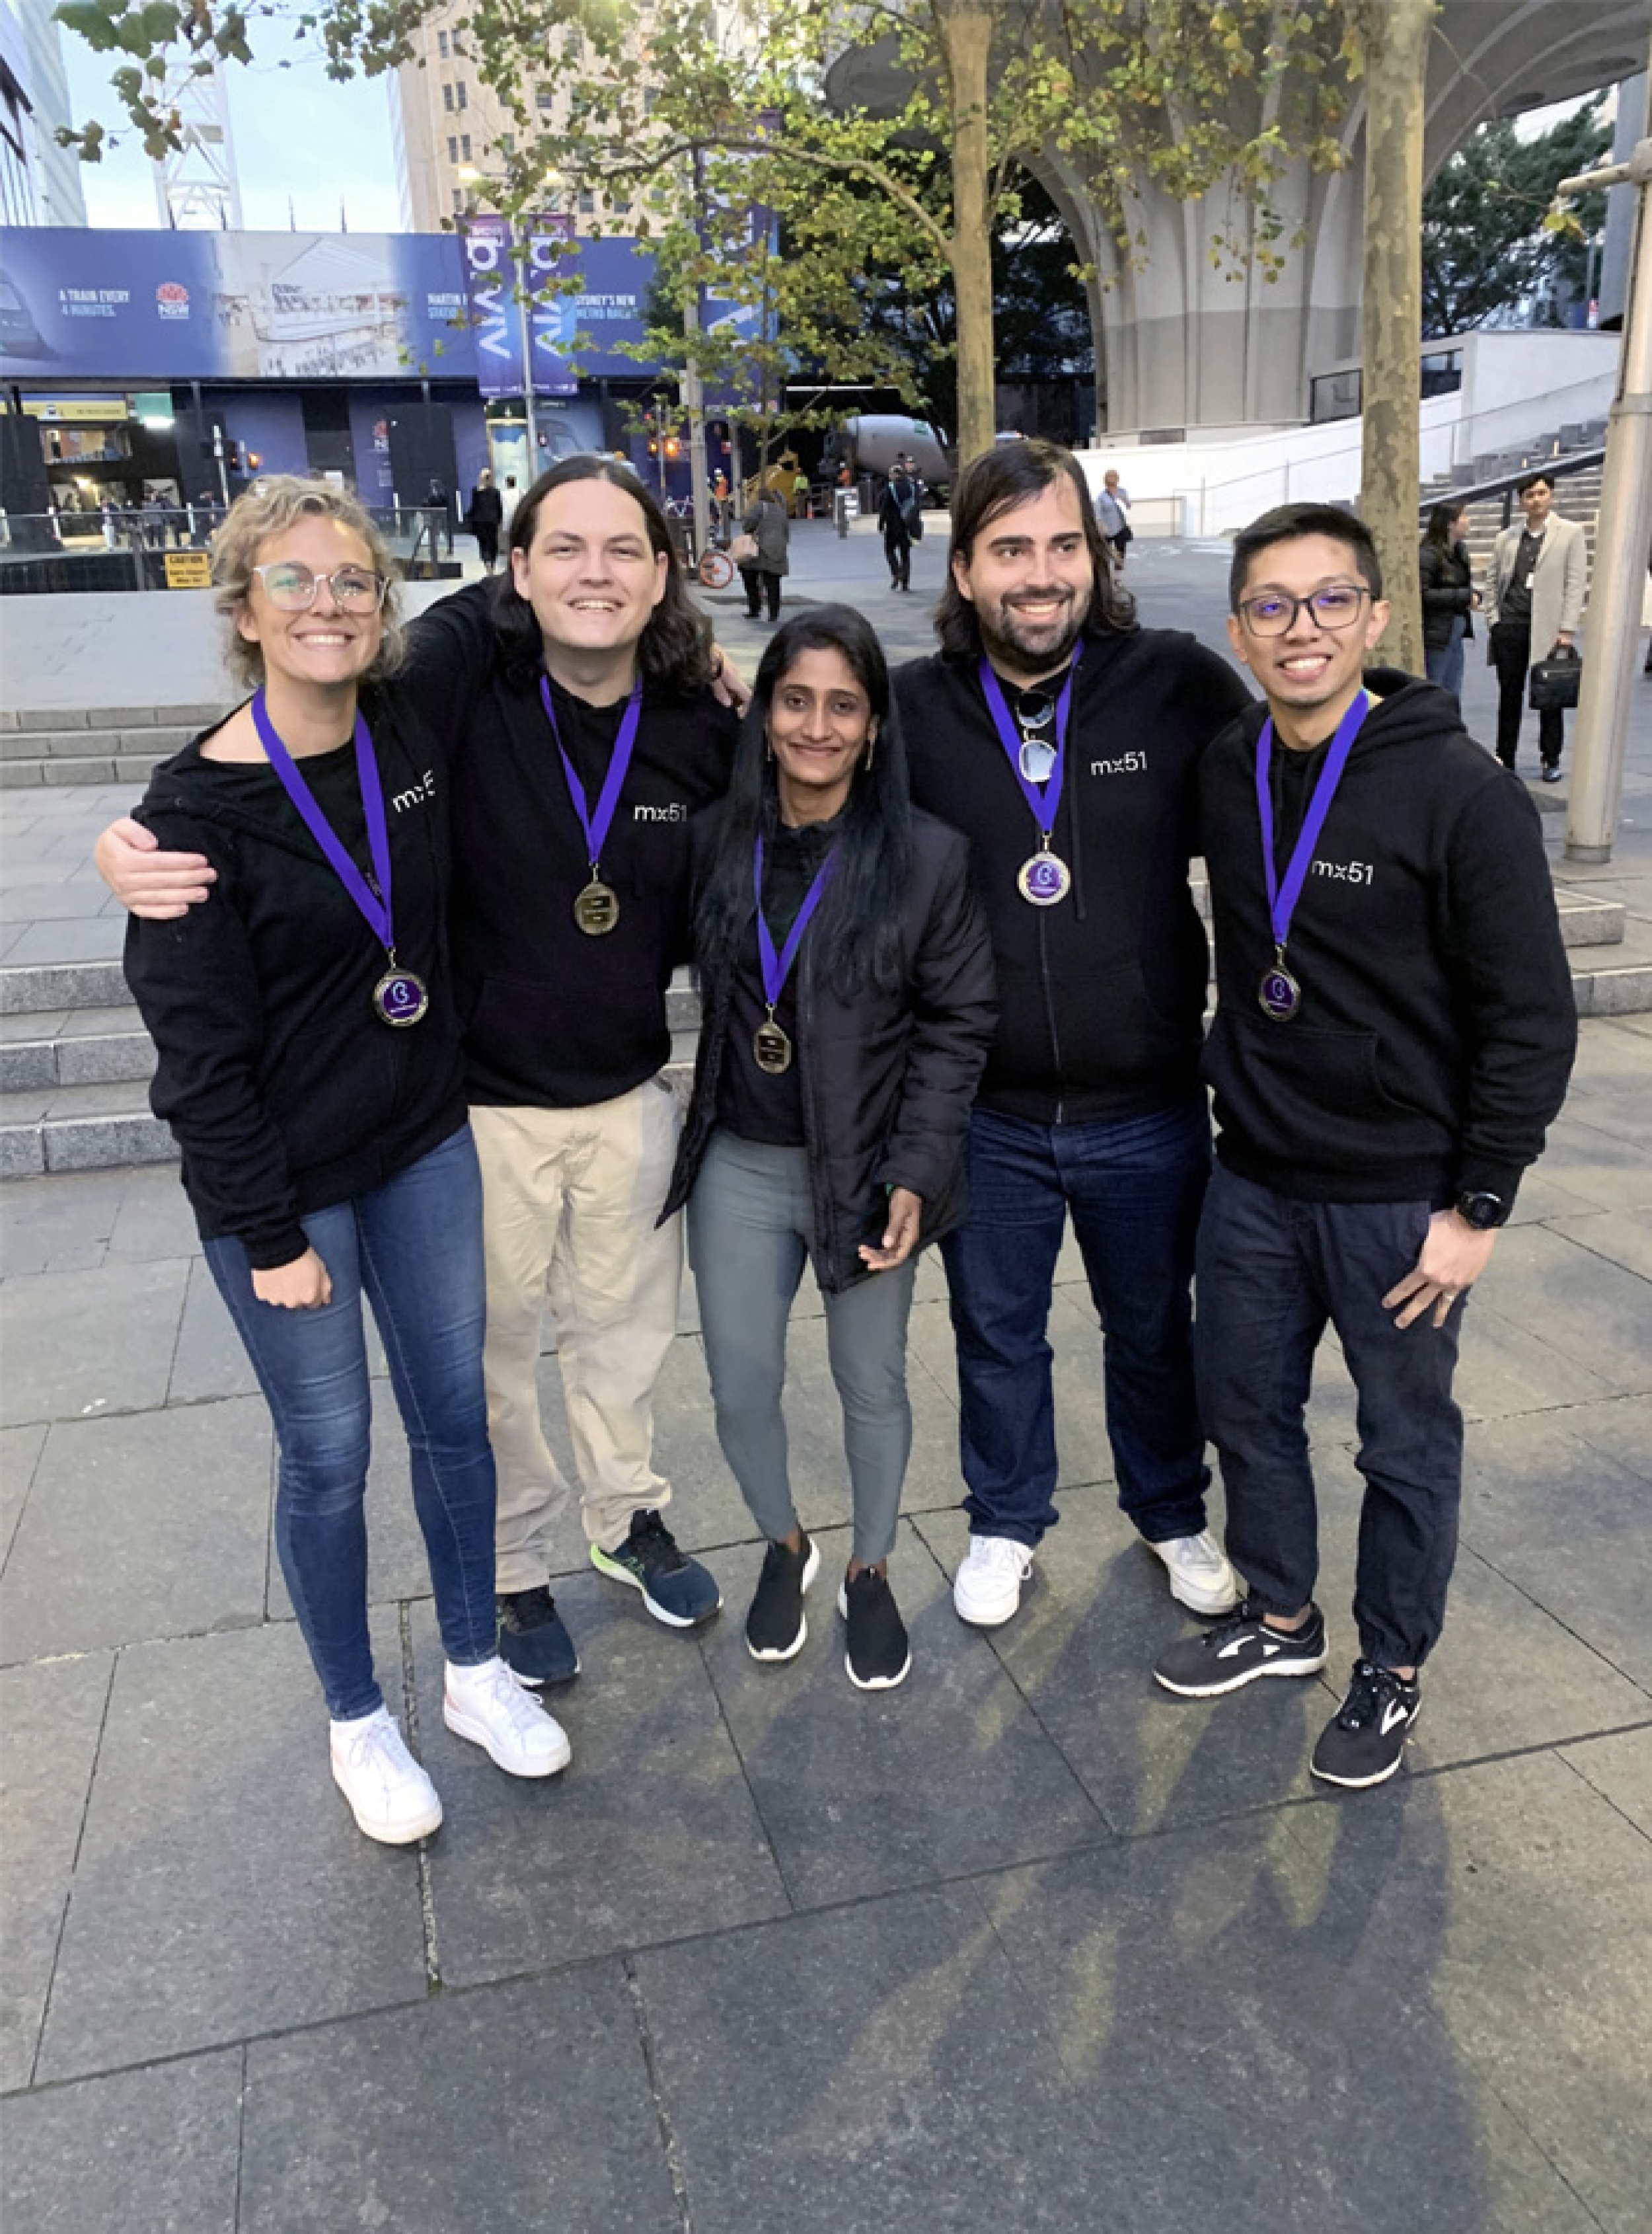 Snapshot of a small group of mx51 colleagues wearing mx51 jumpers and purple key-cords, embracing each other and smiling.